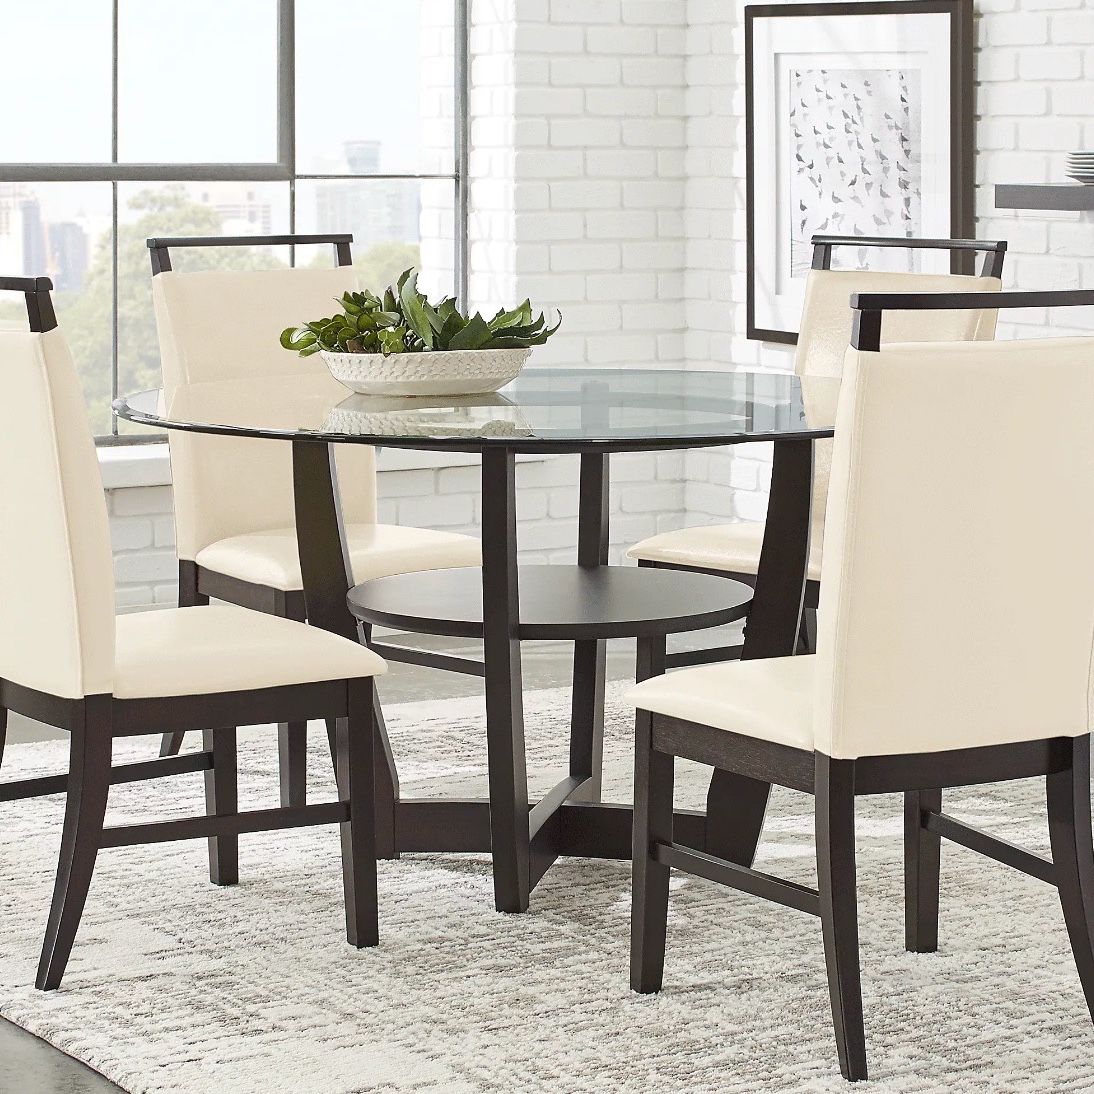 Rooms To Go Glass Dining Room Table Set